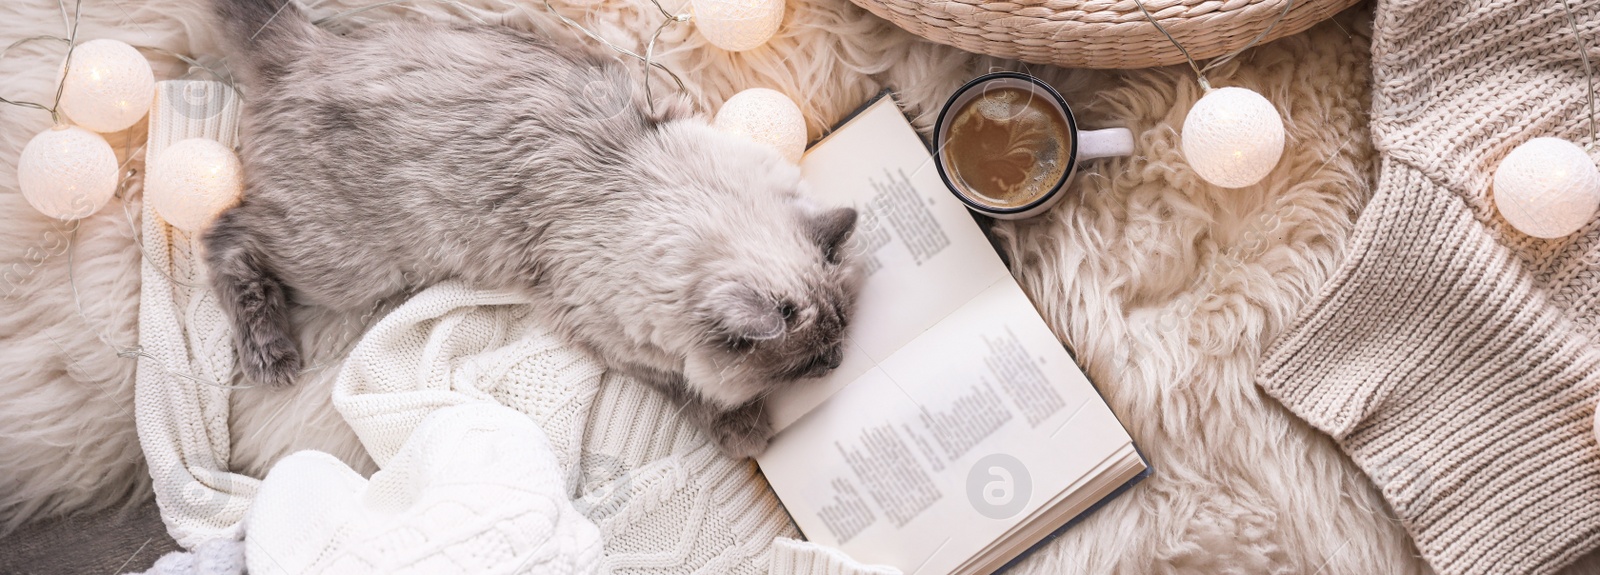 Image of Birman cat, cup of drink and book on rug at home, top view. Banner design